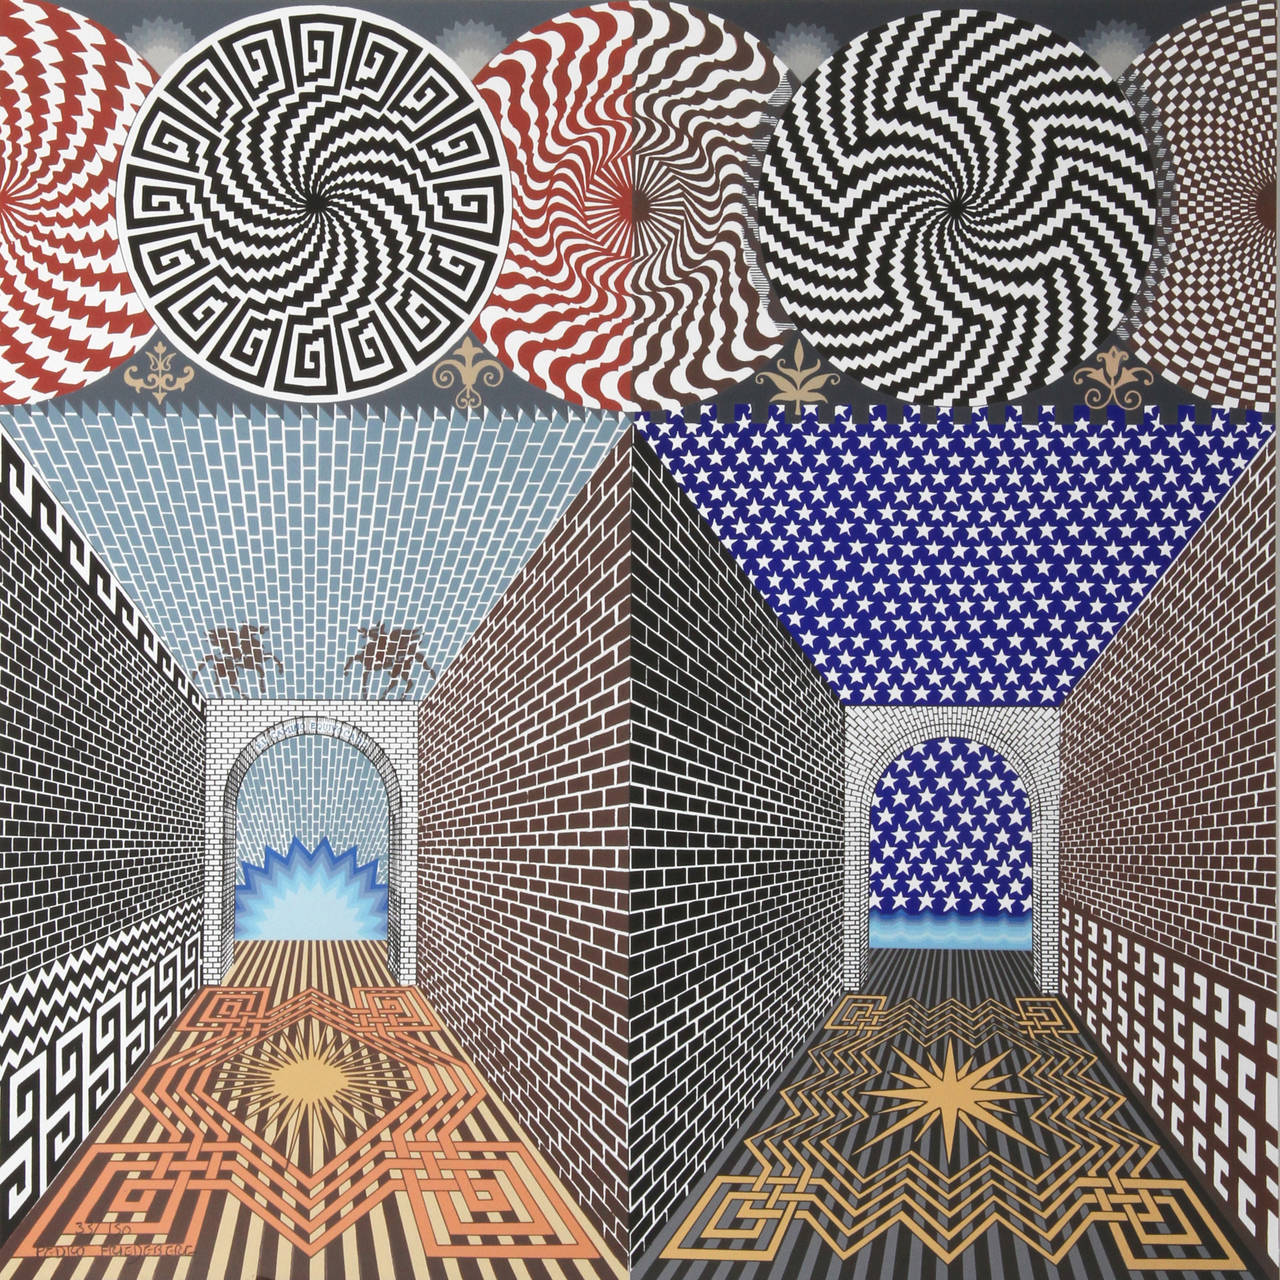 A serigraph print by Pedro Friedeberg from 1987. A optical abstract image of a surrealist interior. 

Artist: Pedro Friedeberg, Mexican (1936 - )
Title: Encuentro de dos Mundos
Year: 1987
Medium: Serigraph, signed and numbered in